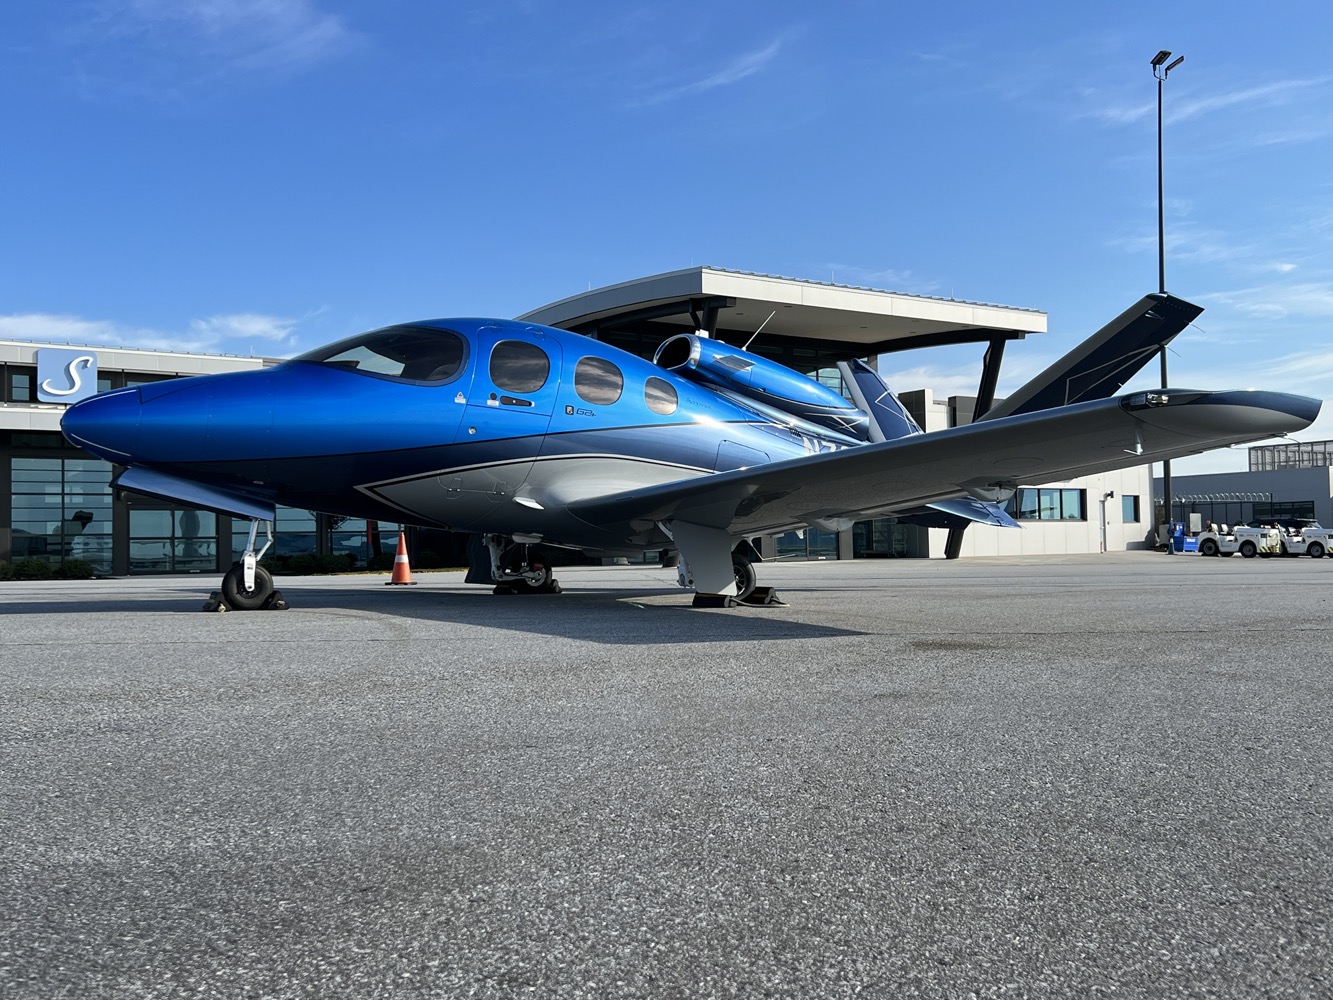 a blue airplane parked in a parking lot